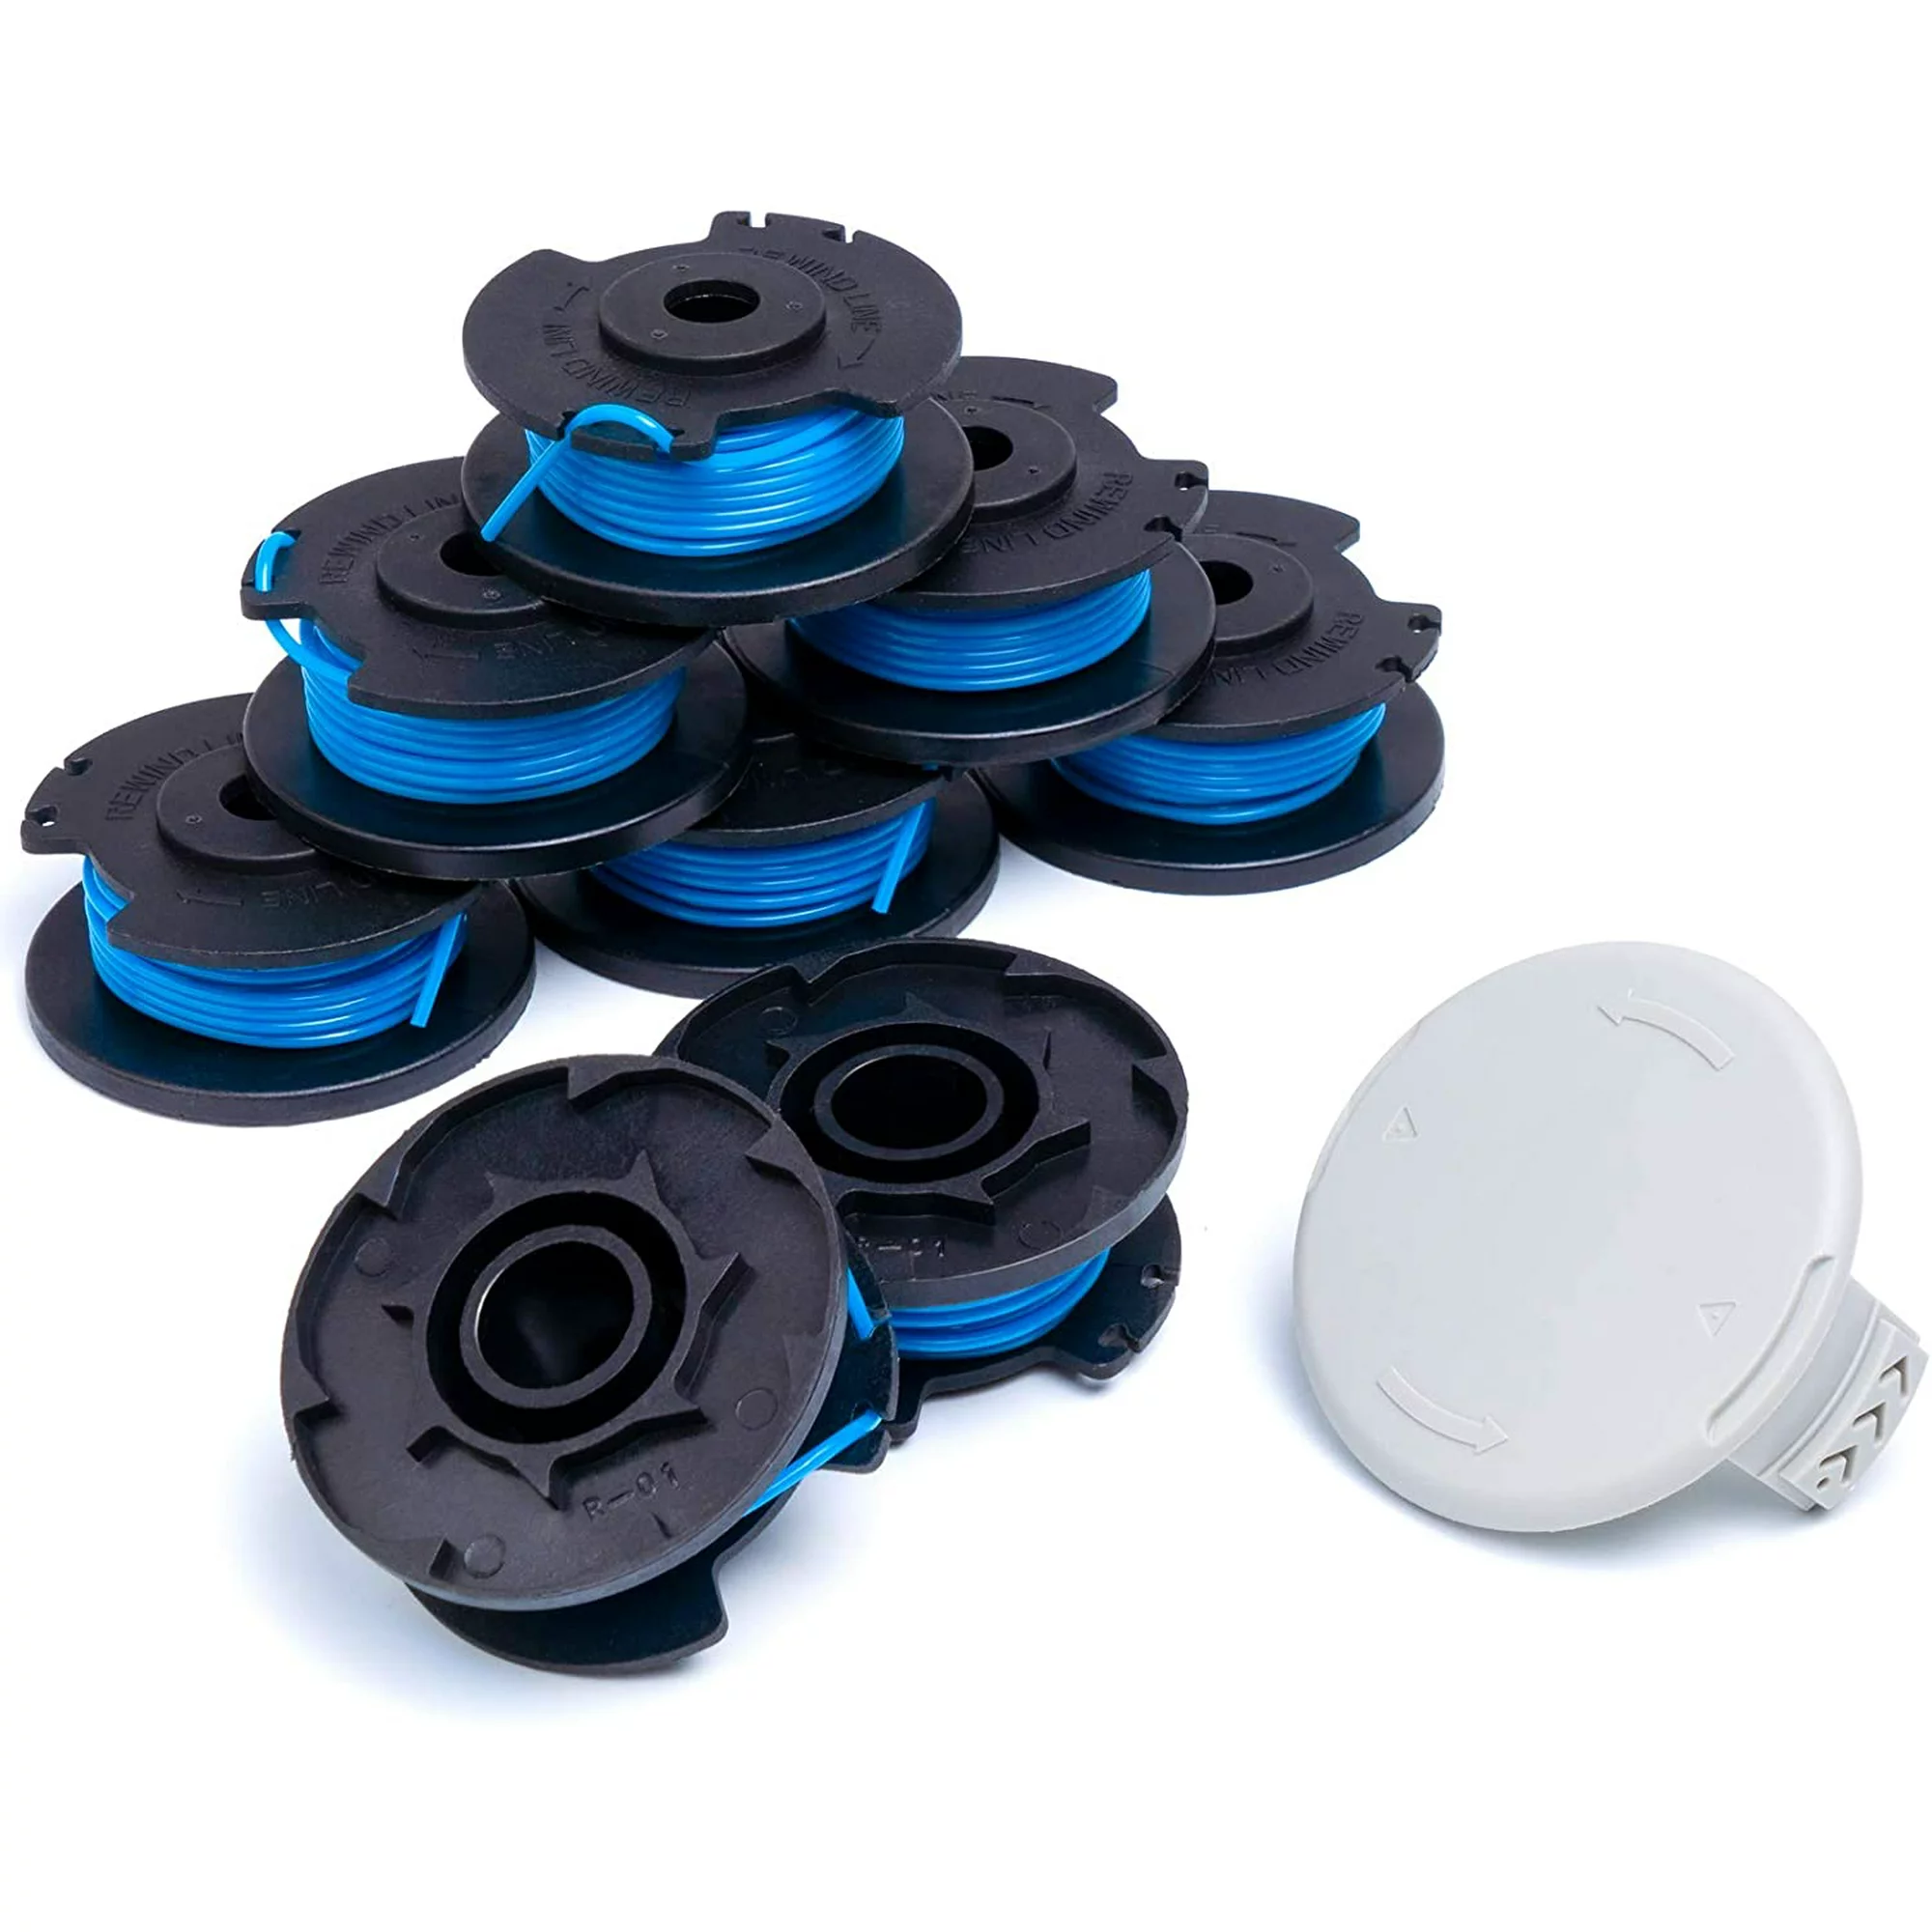  Trimmer Line Replacement Spools for Black & Decker Auto-Feed String  Trimmers .065 10 Pack: 8 Spools + 1 Cap + 1 Spring : Patio, Lawn & Garden